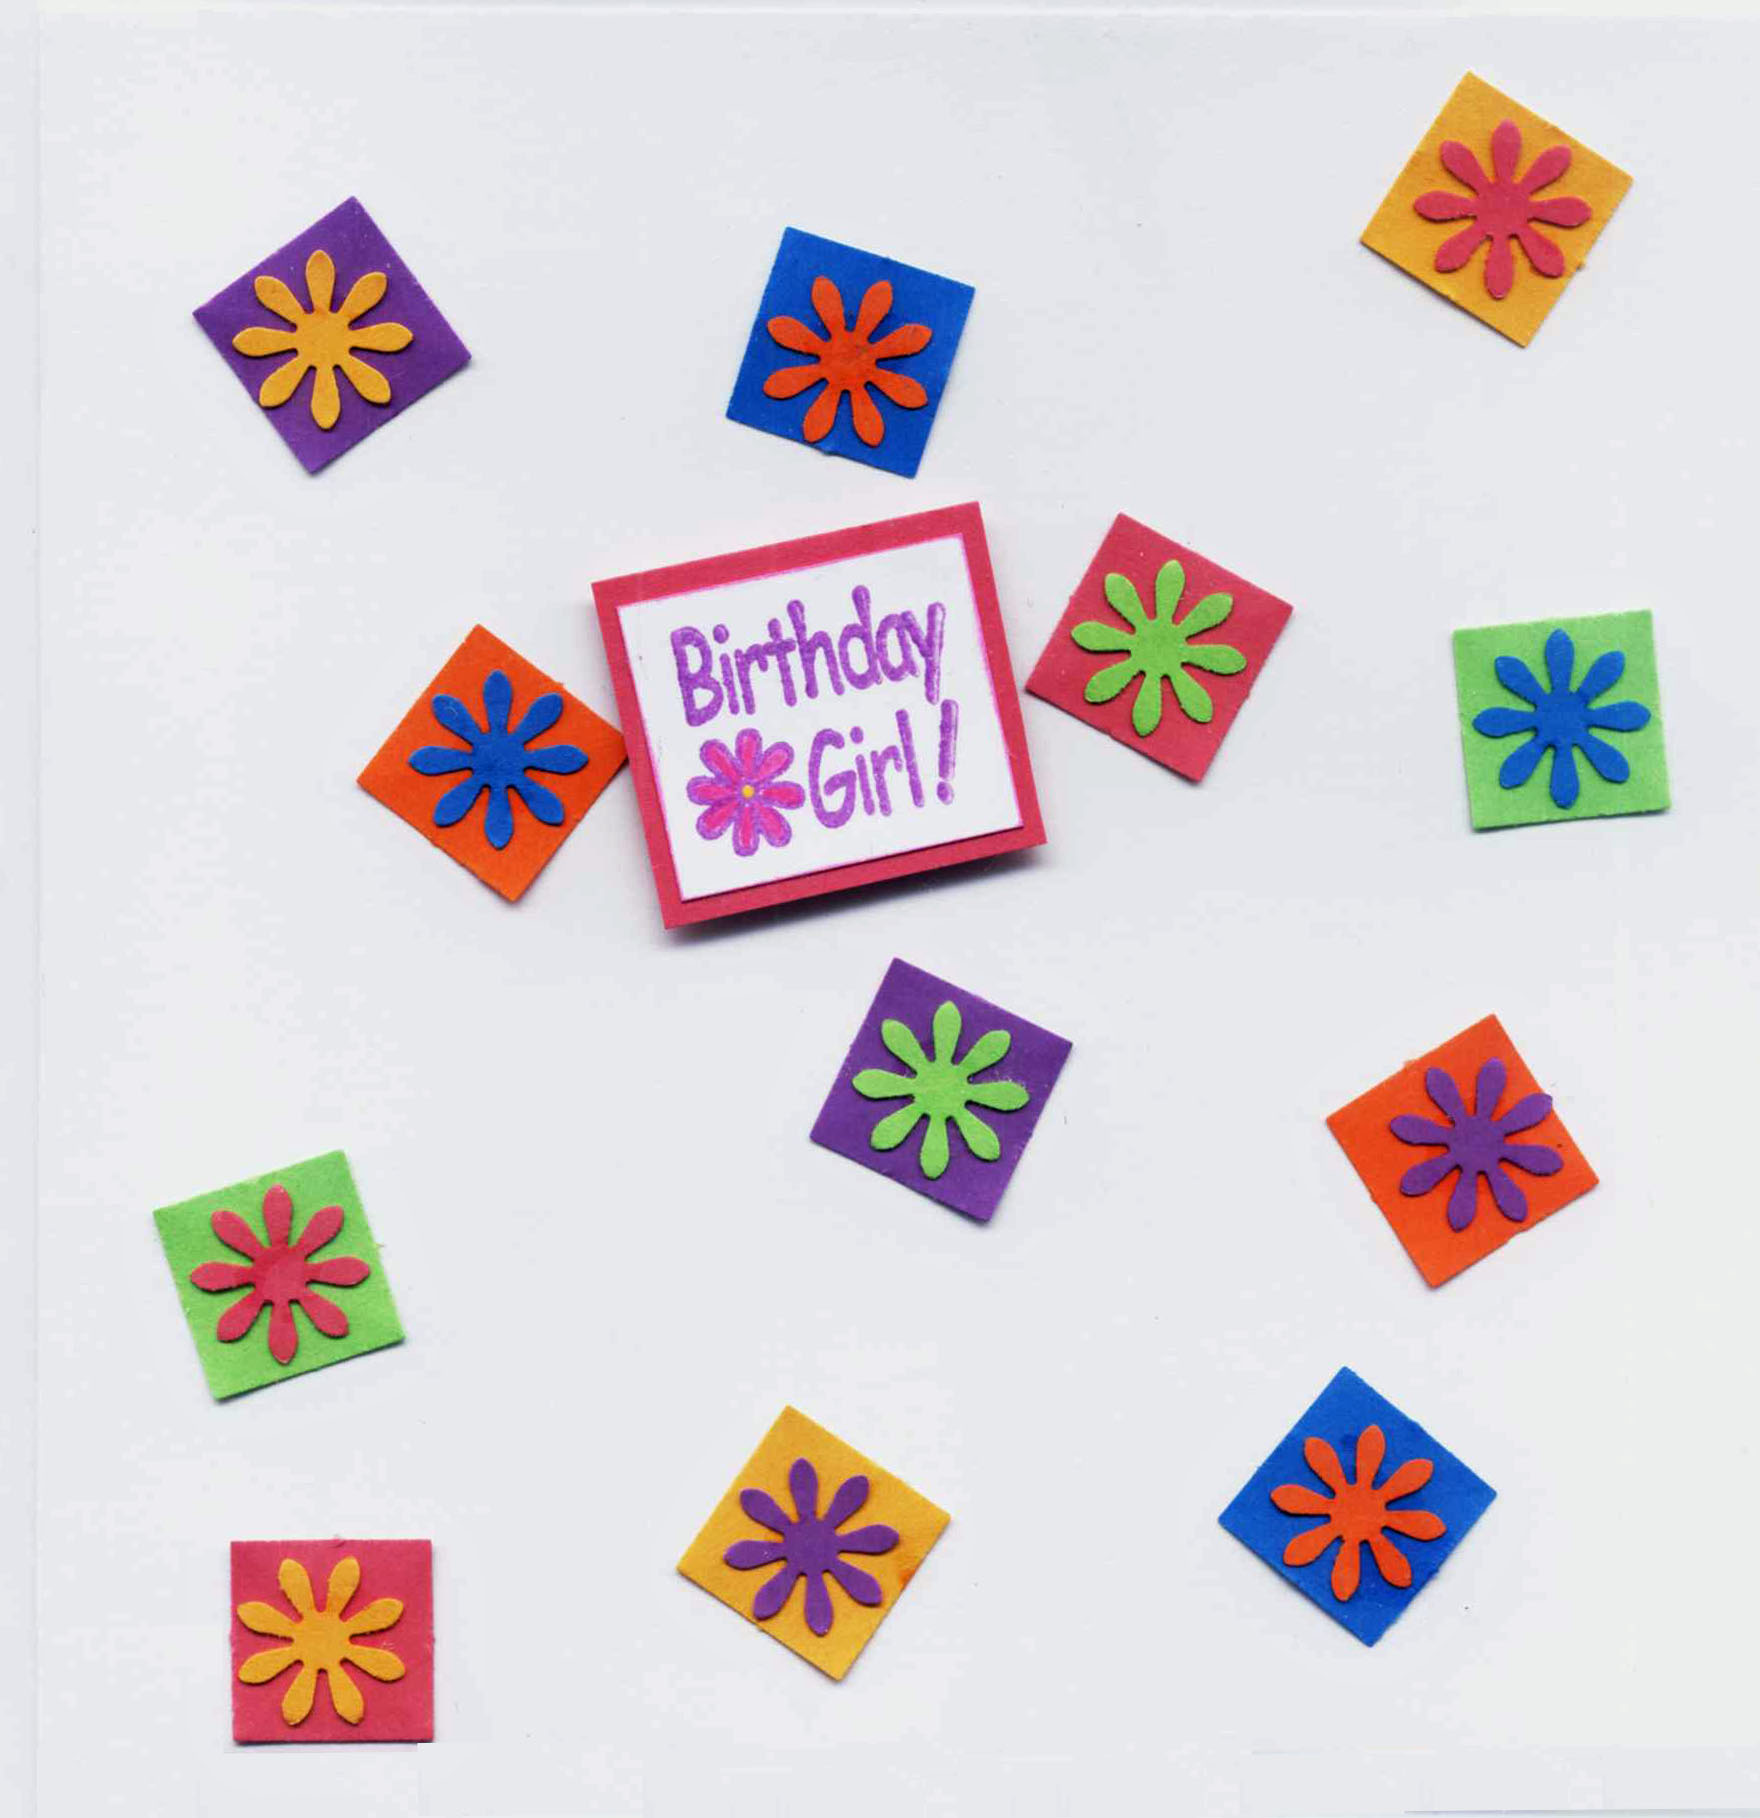 Flower Power - Handmade card design featuring a petal design.Suitable for Birthday and many other occasions